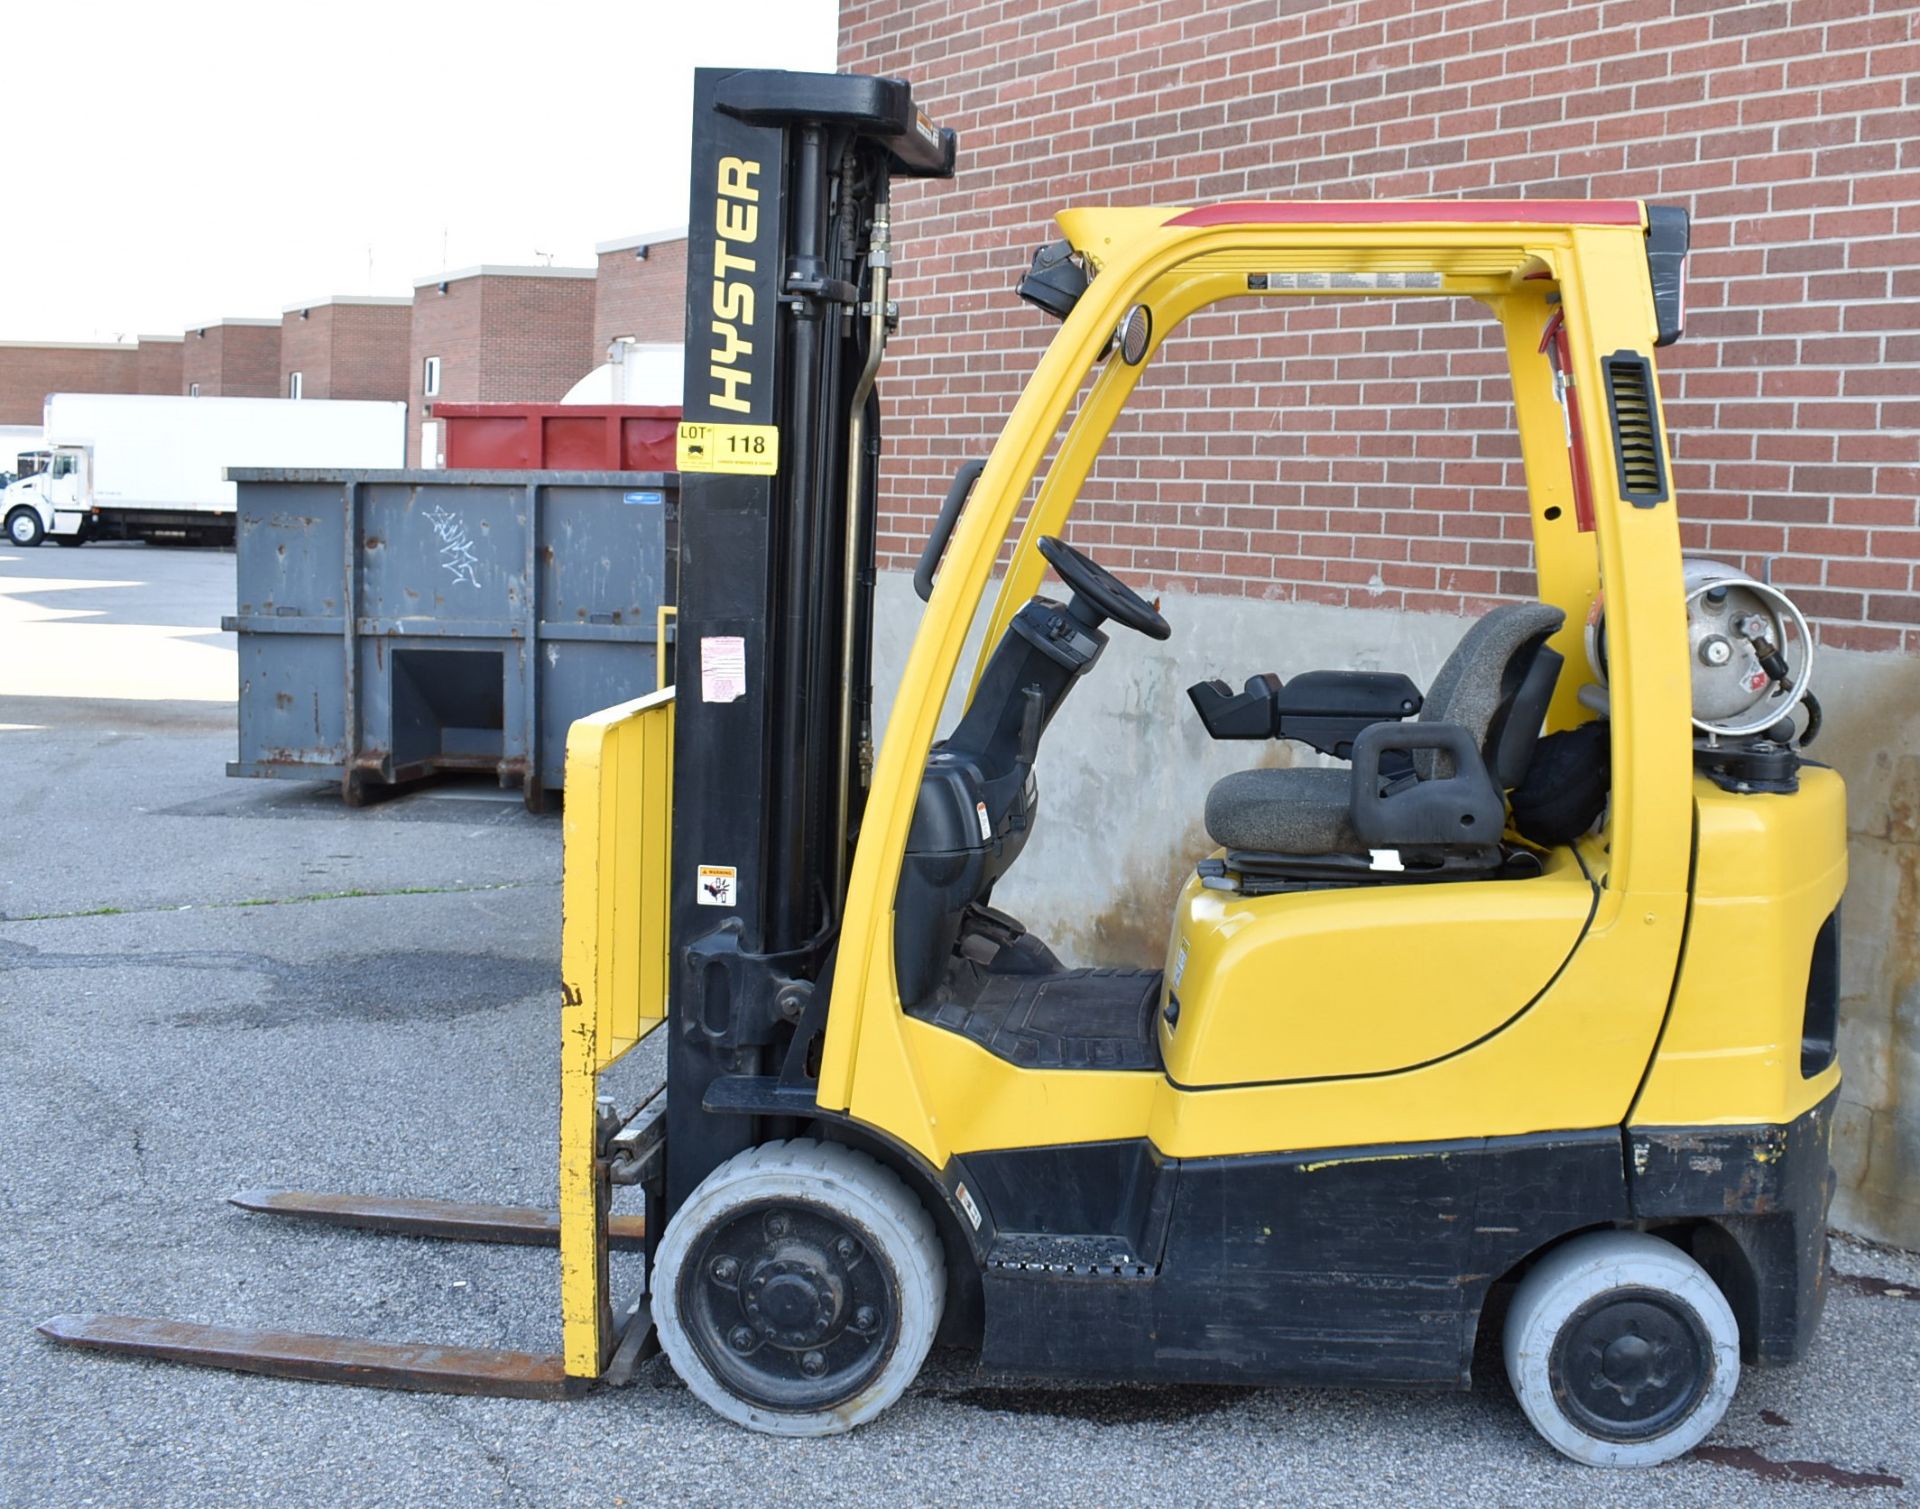 HYSTER S50FT 4,200 LB CAPACITY LPG FORKLIFT WITH 218.5" MAXIMUM LIFT HEIGHT, 3-STAGE MAST, SIDE - Image 3 of 10